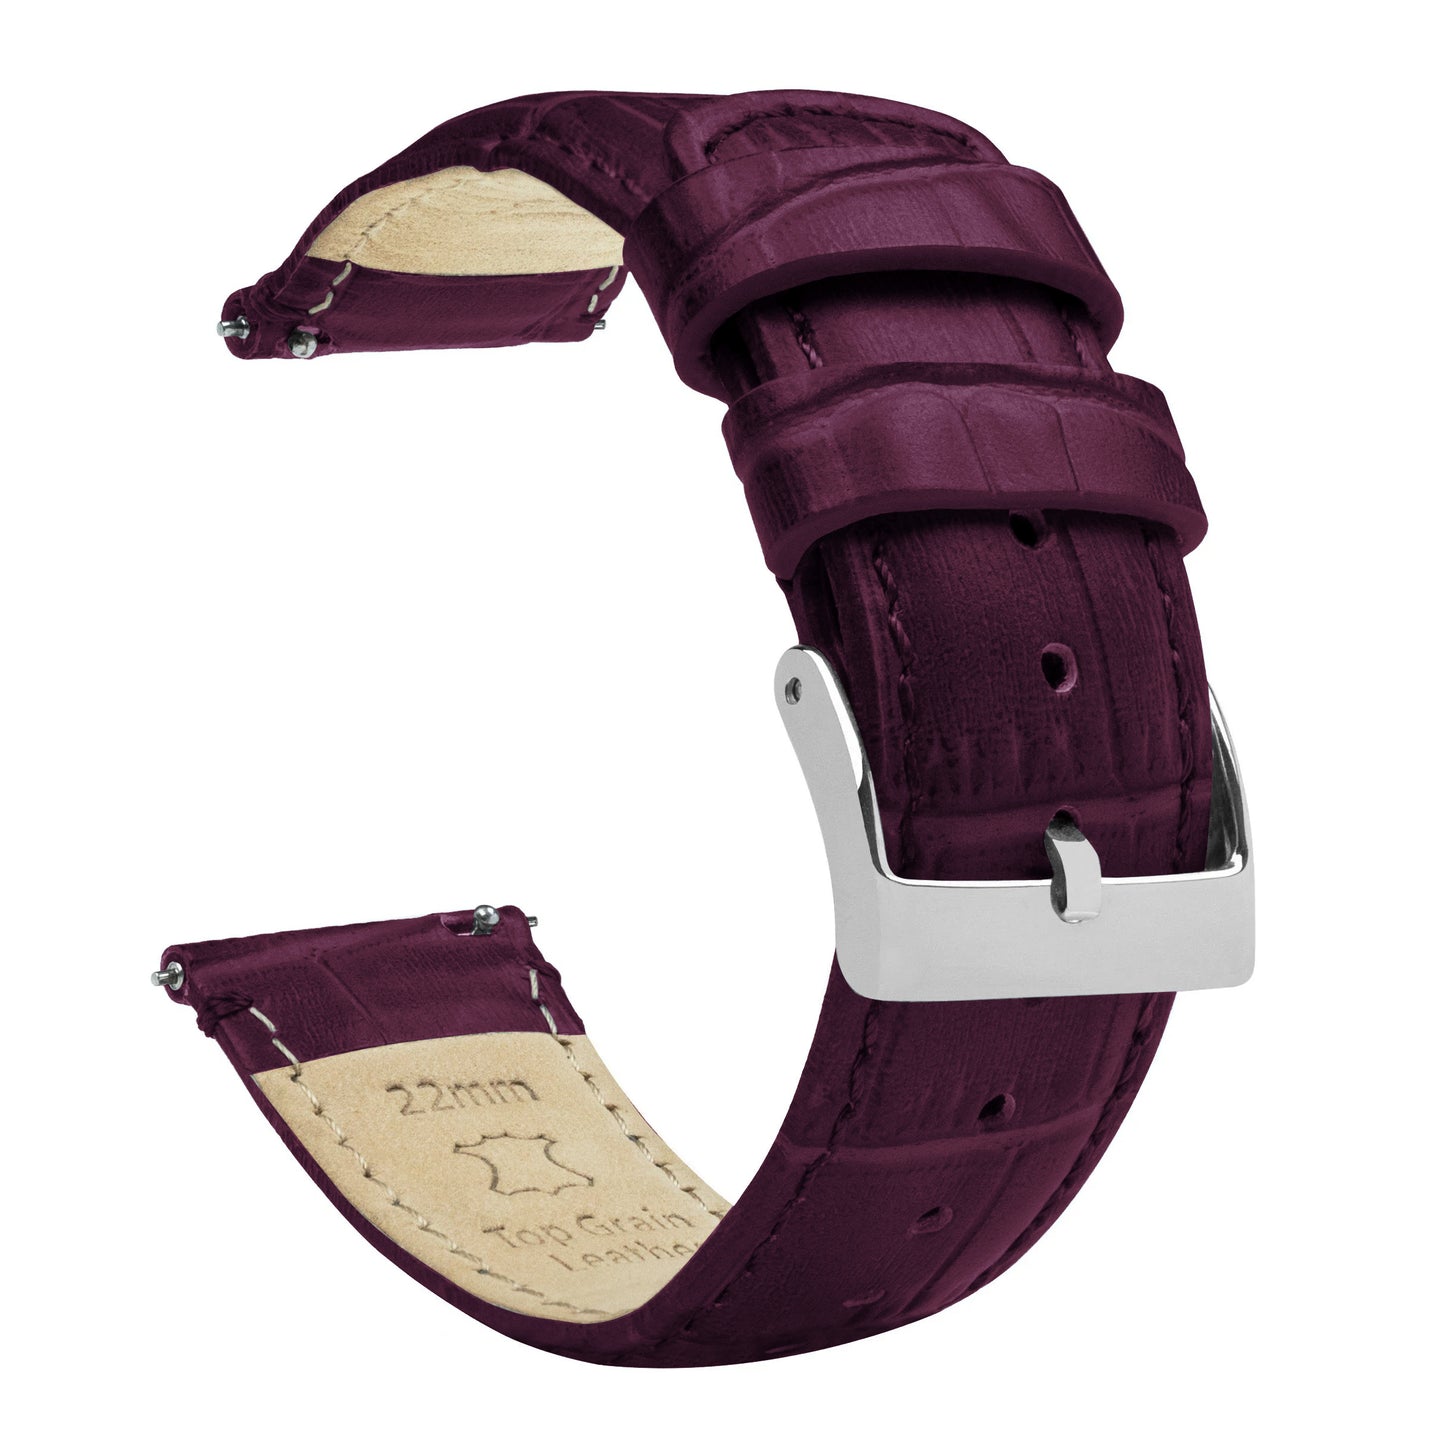 Withings Nokia Activité and Steel HR | Merlot Alligator Grain Leather - Barton Watch Bands